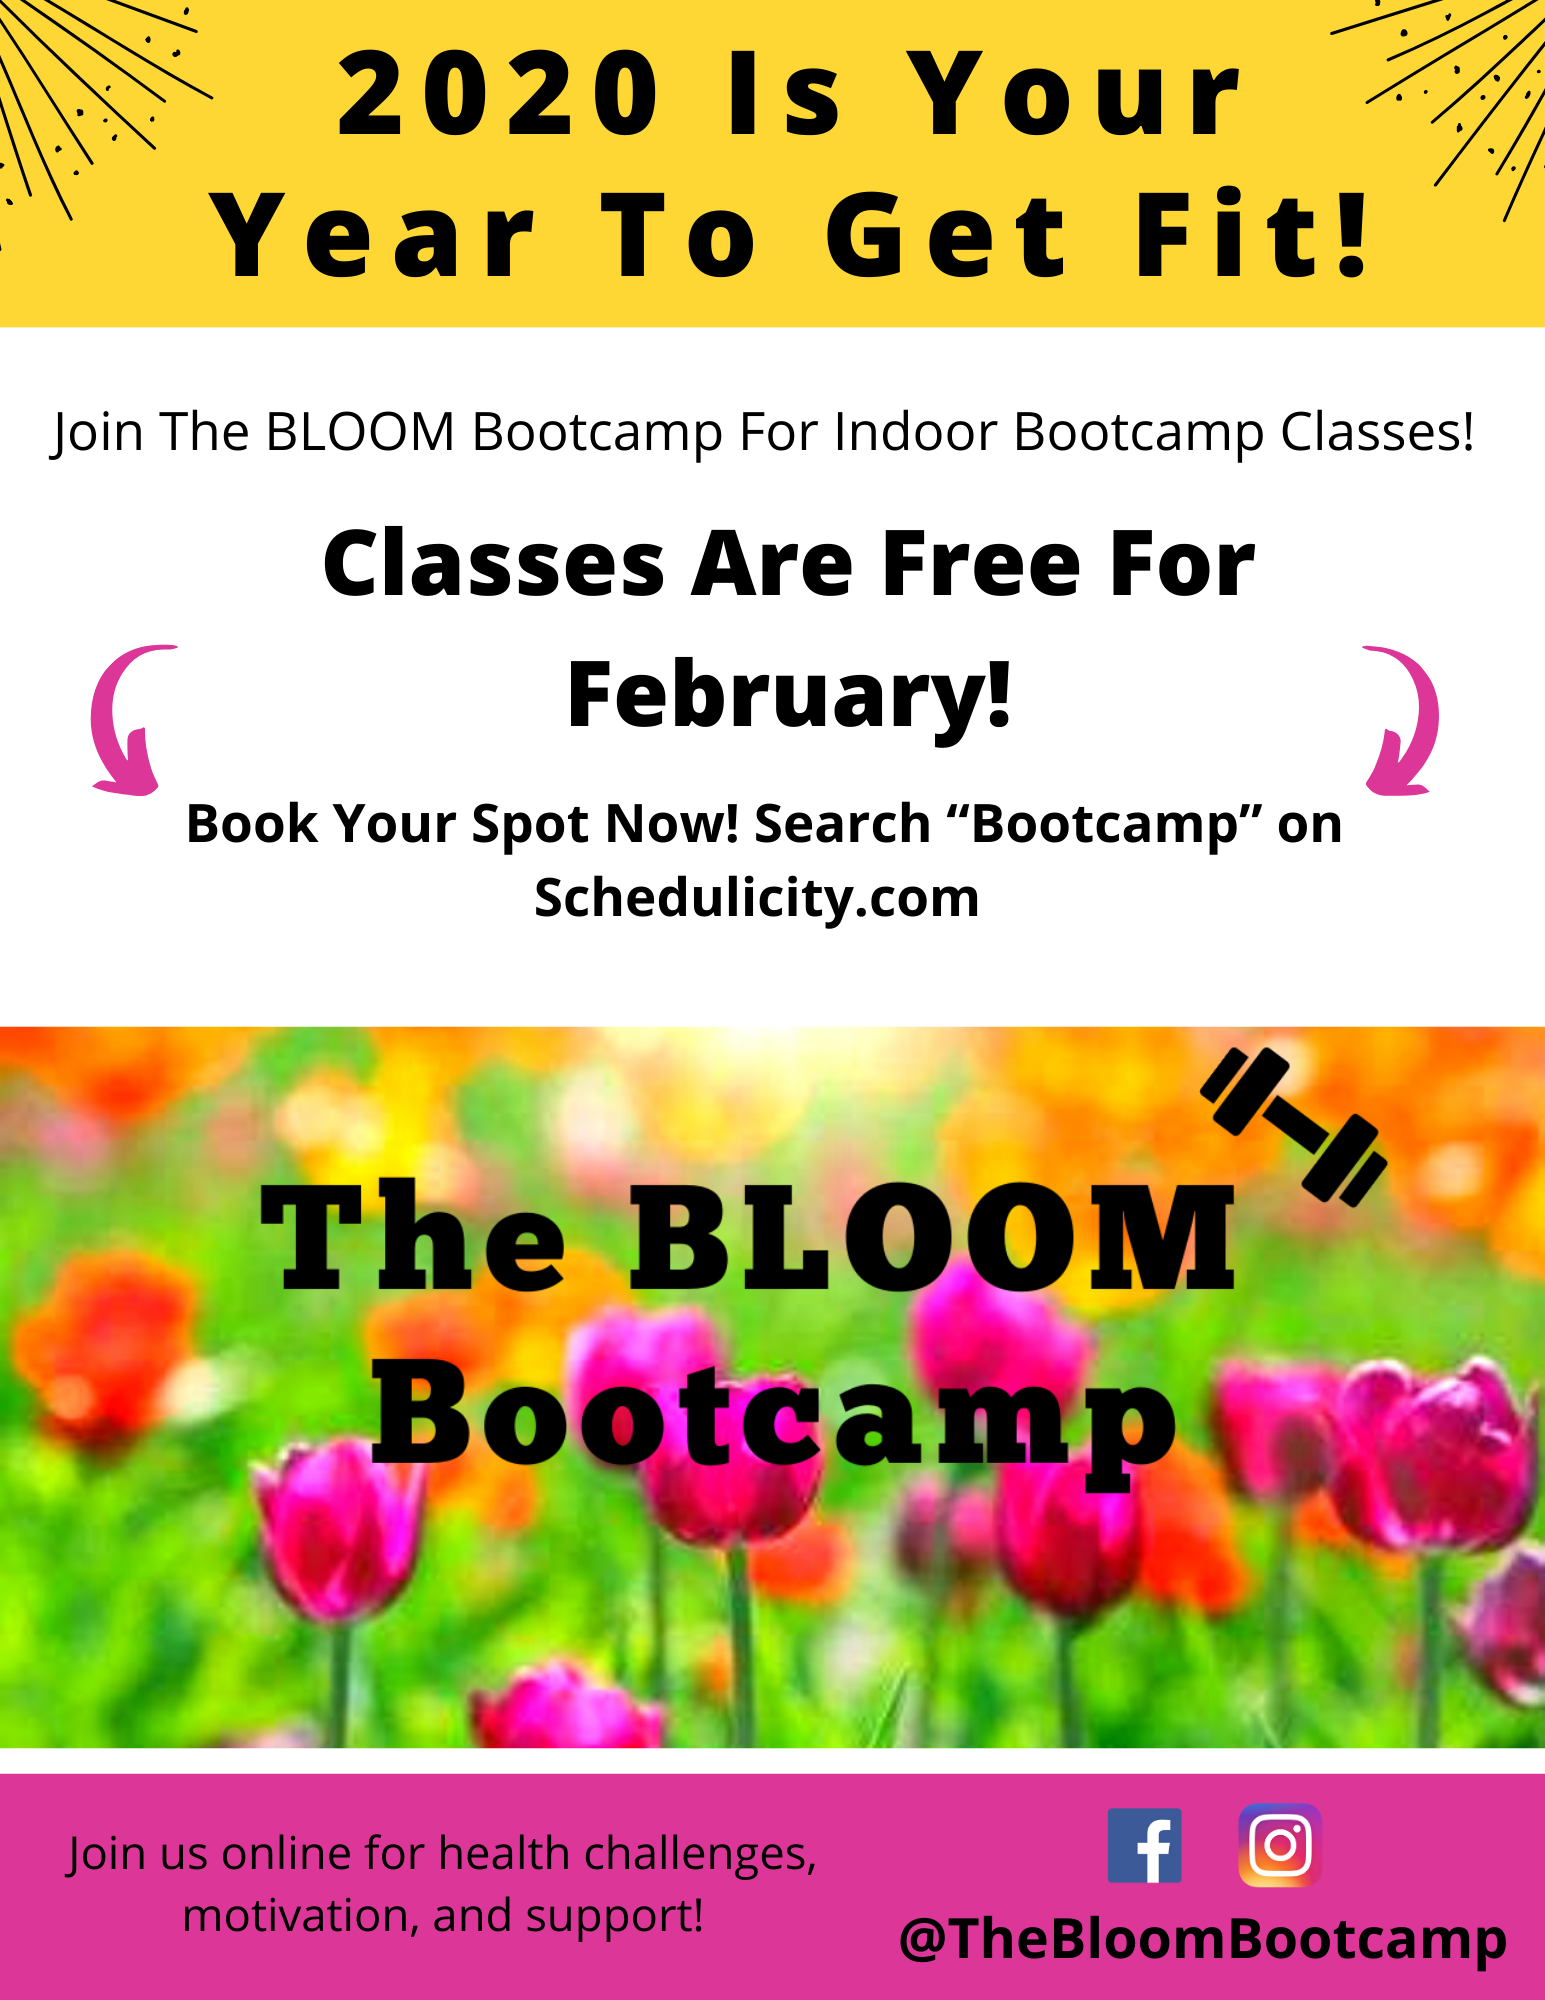 FREE Class February - Bootcamp Classes